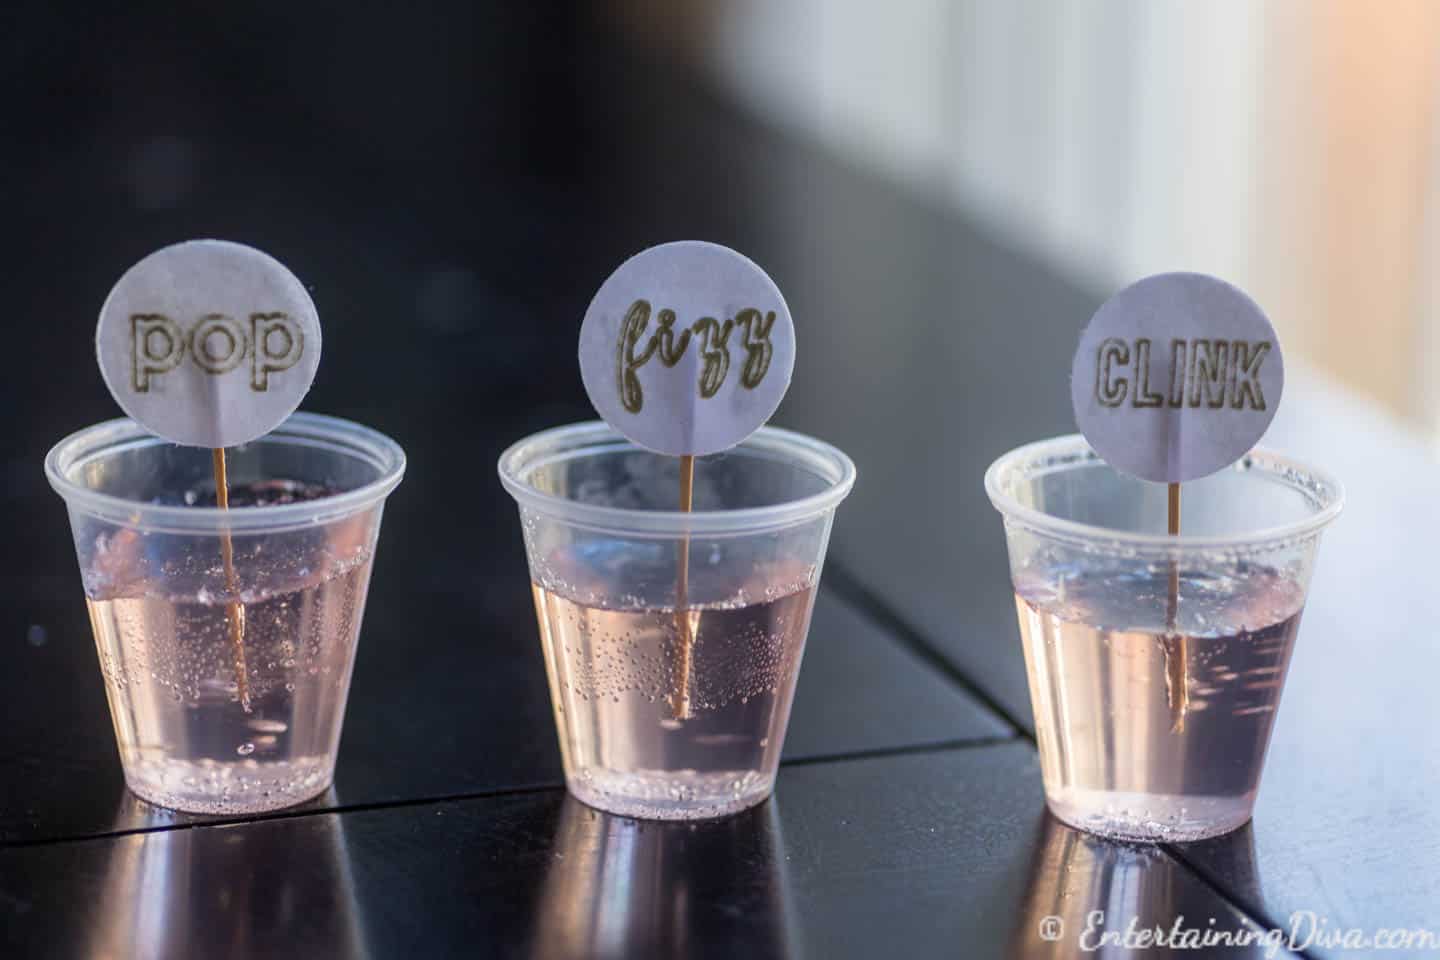 Pink champagne jelly shots with pop, fizz, clink toothpicks